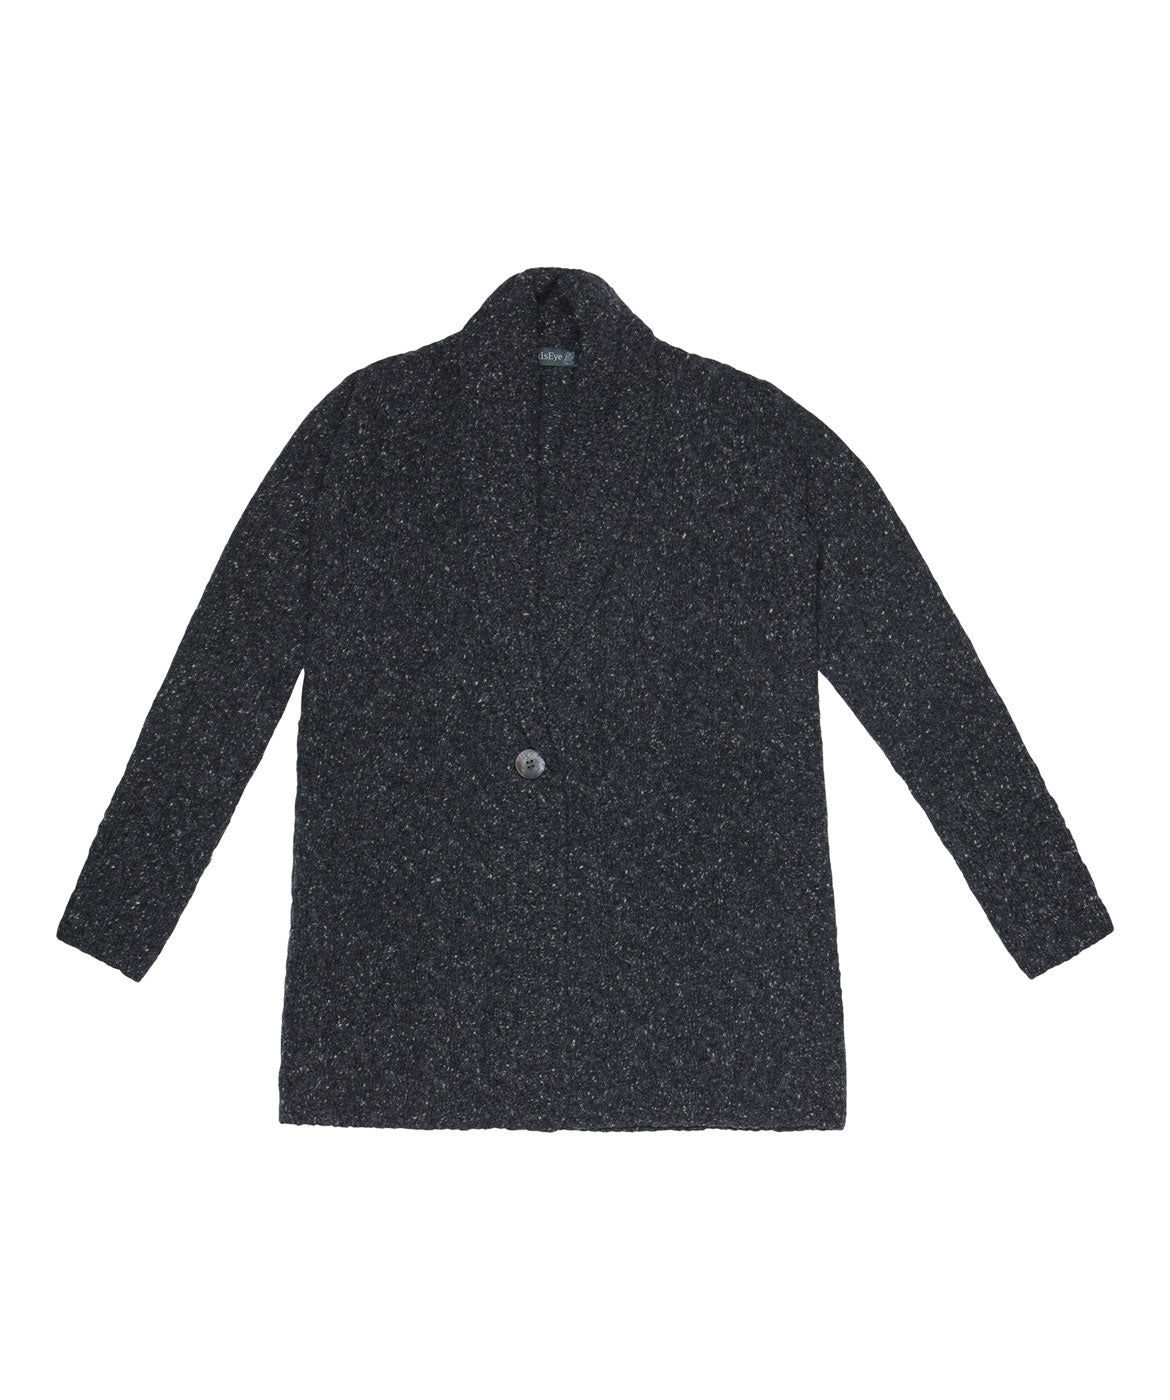 IrelandsEye Knitwear Adare Cable One Button Cardigan Charcoal